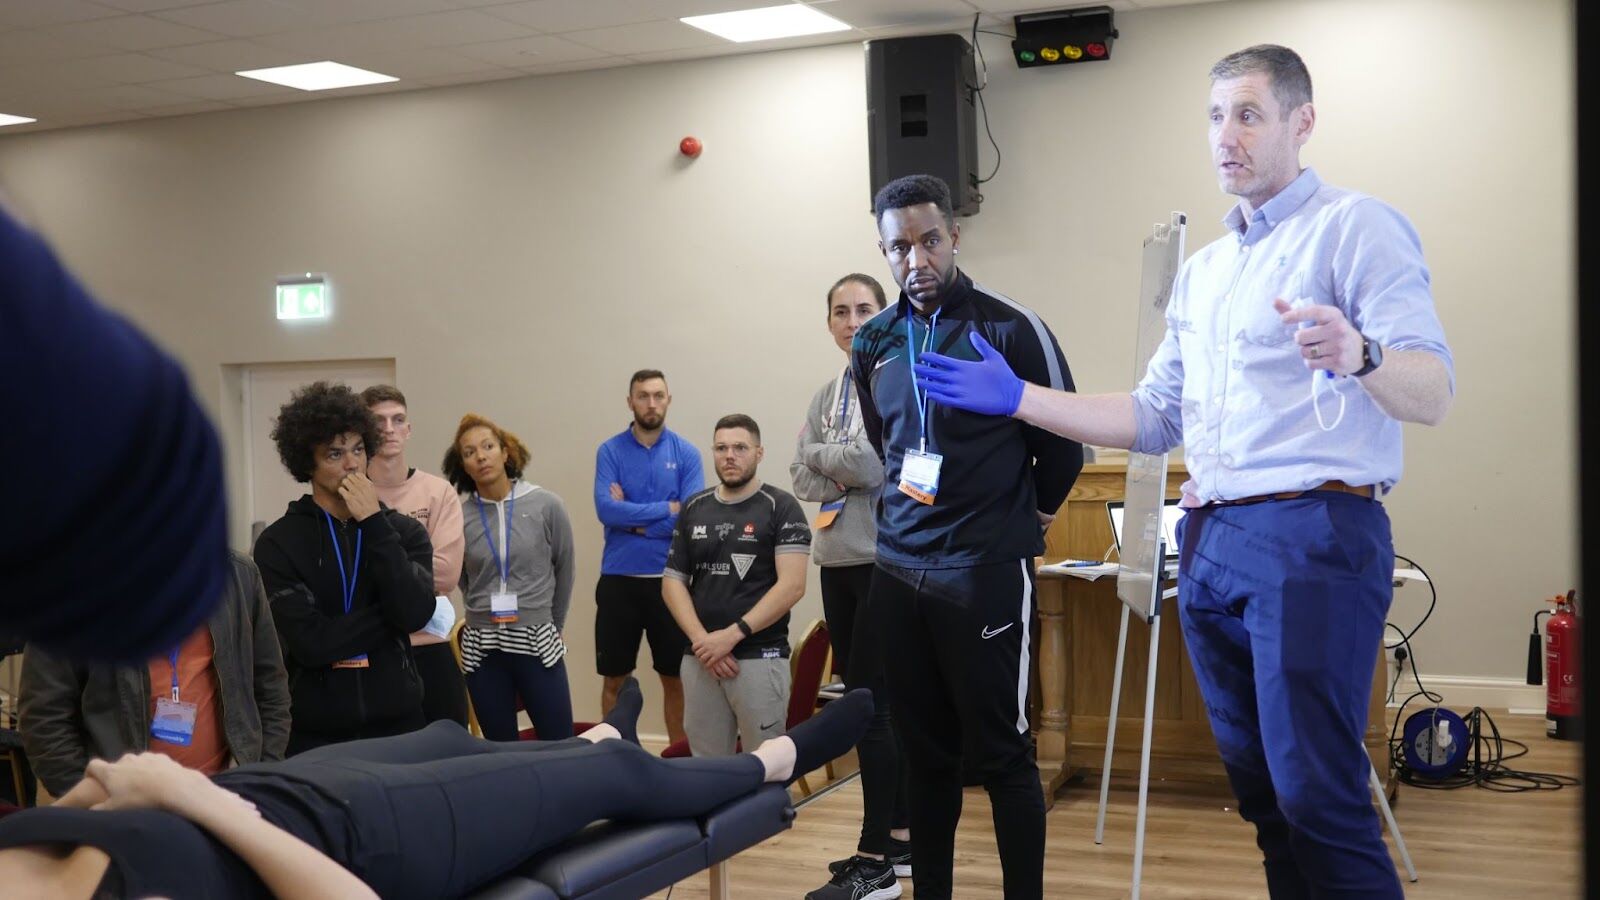 Accessing the cutting edge physio techniques and strategies with the ProSport Academy